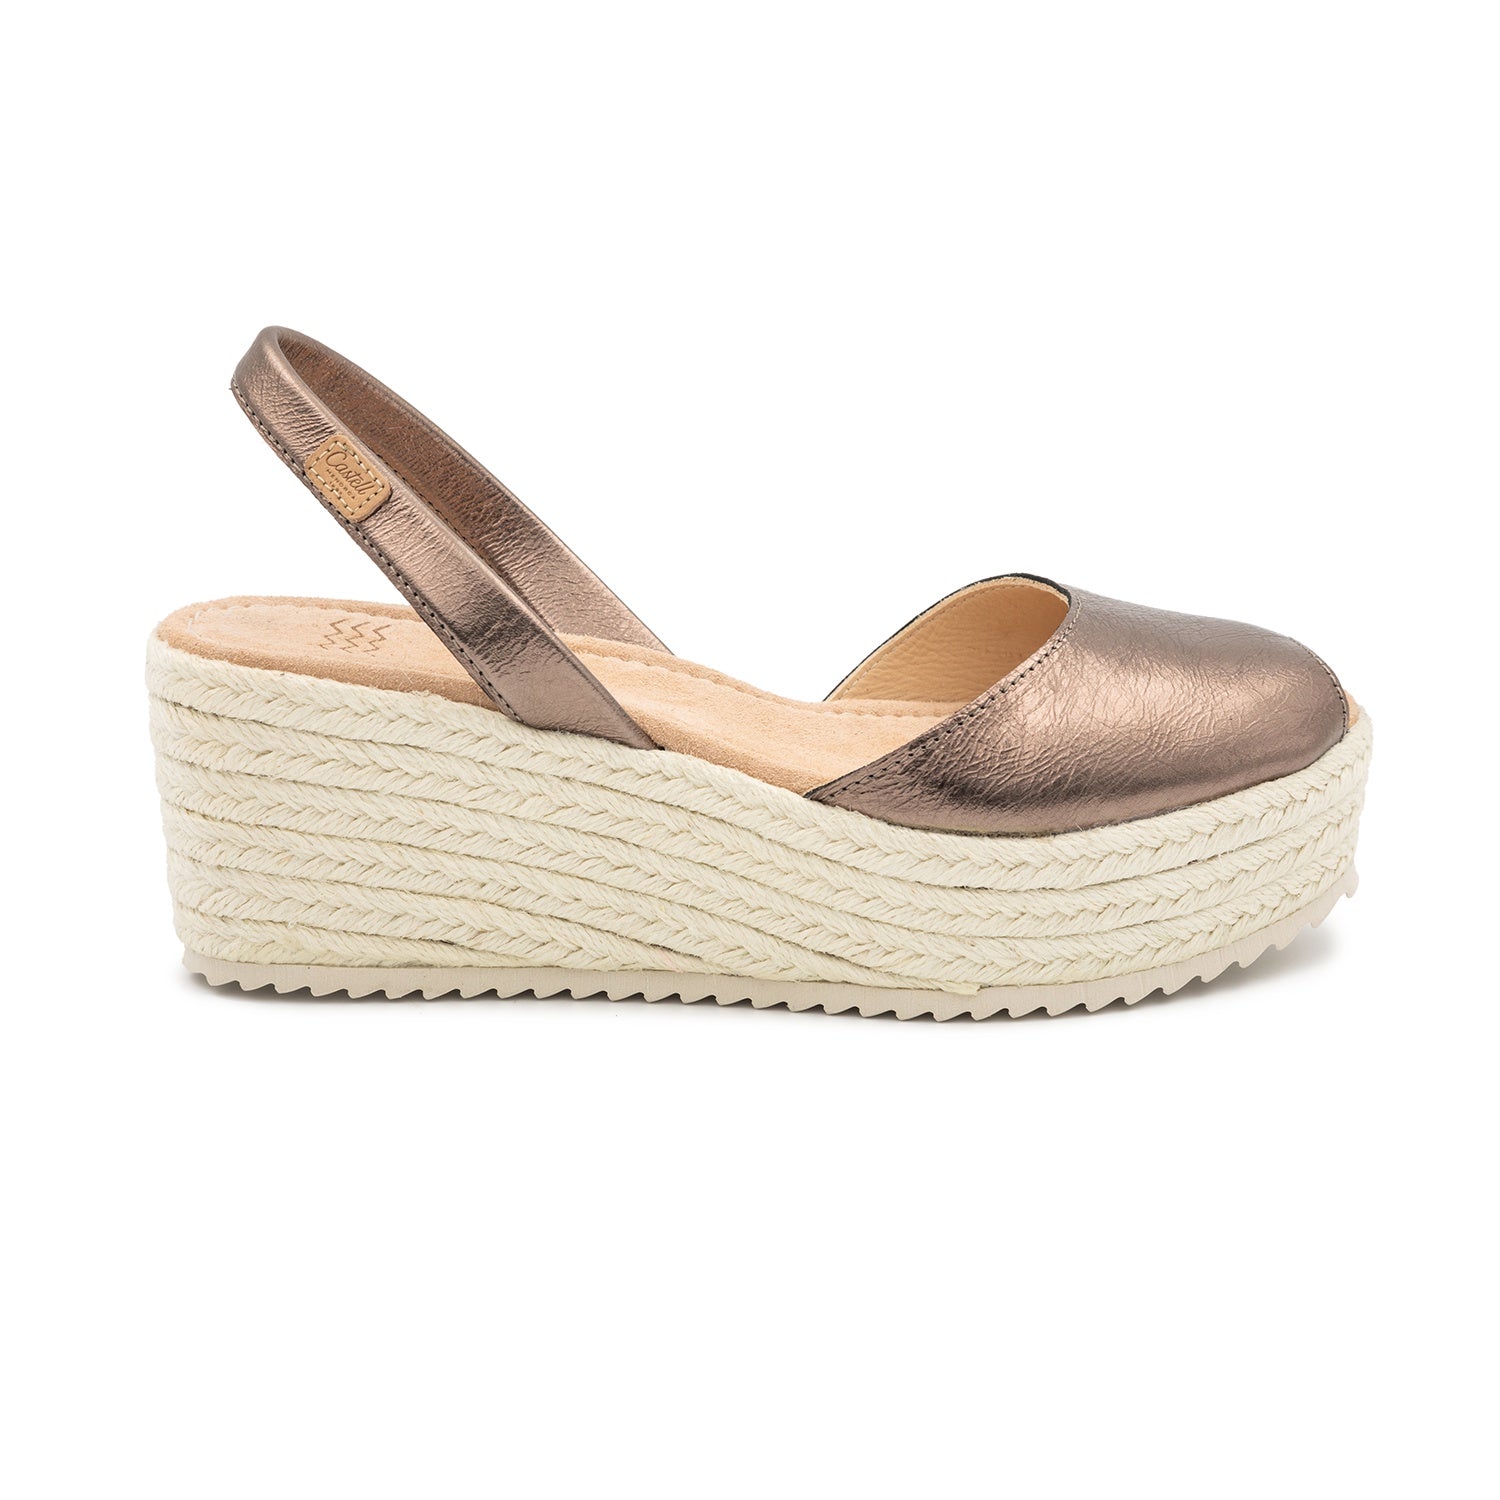 Standard Leather Menorcan Sandal With Metallic Touch For Women – 2580 Vico Las Vegas